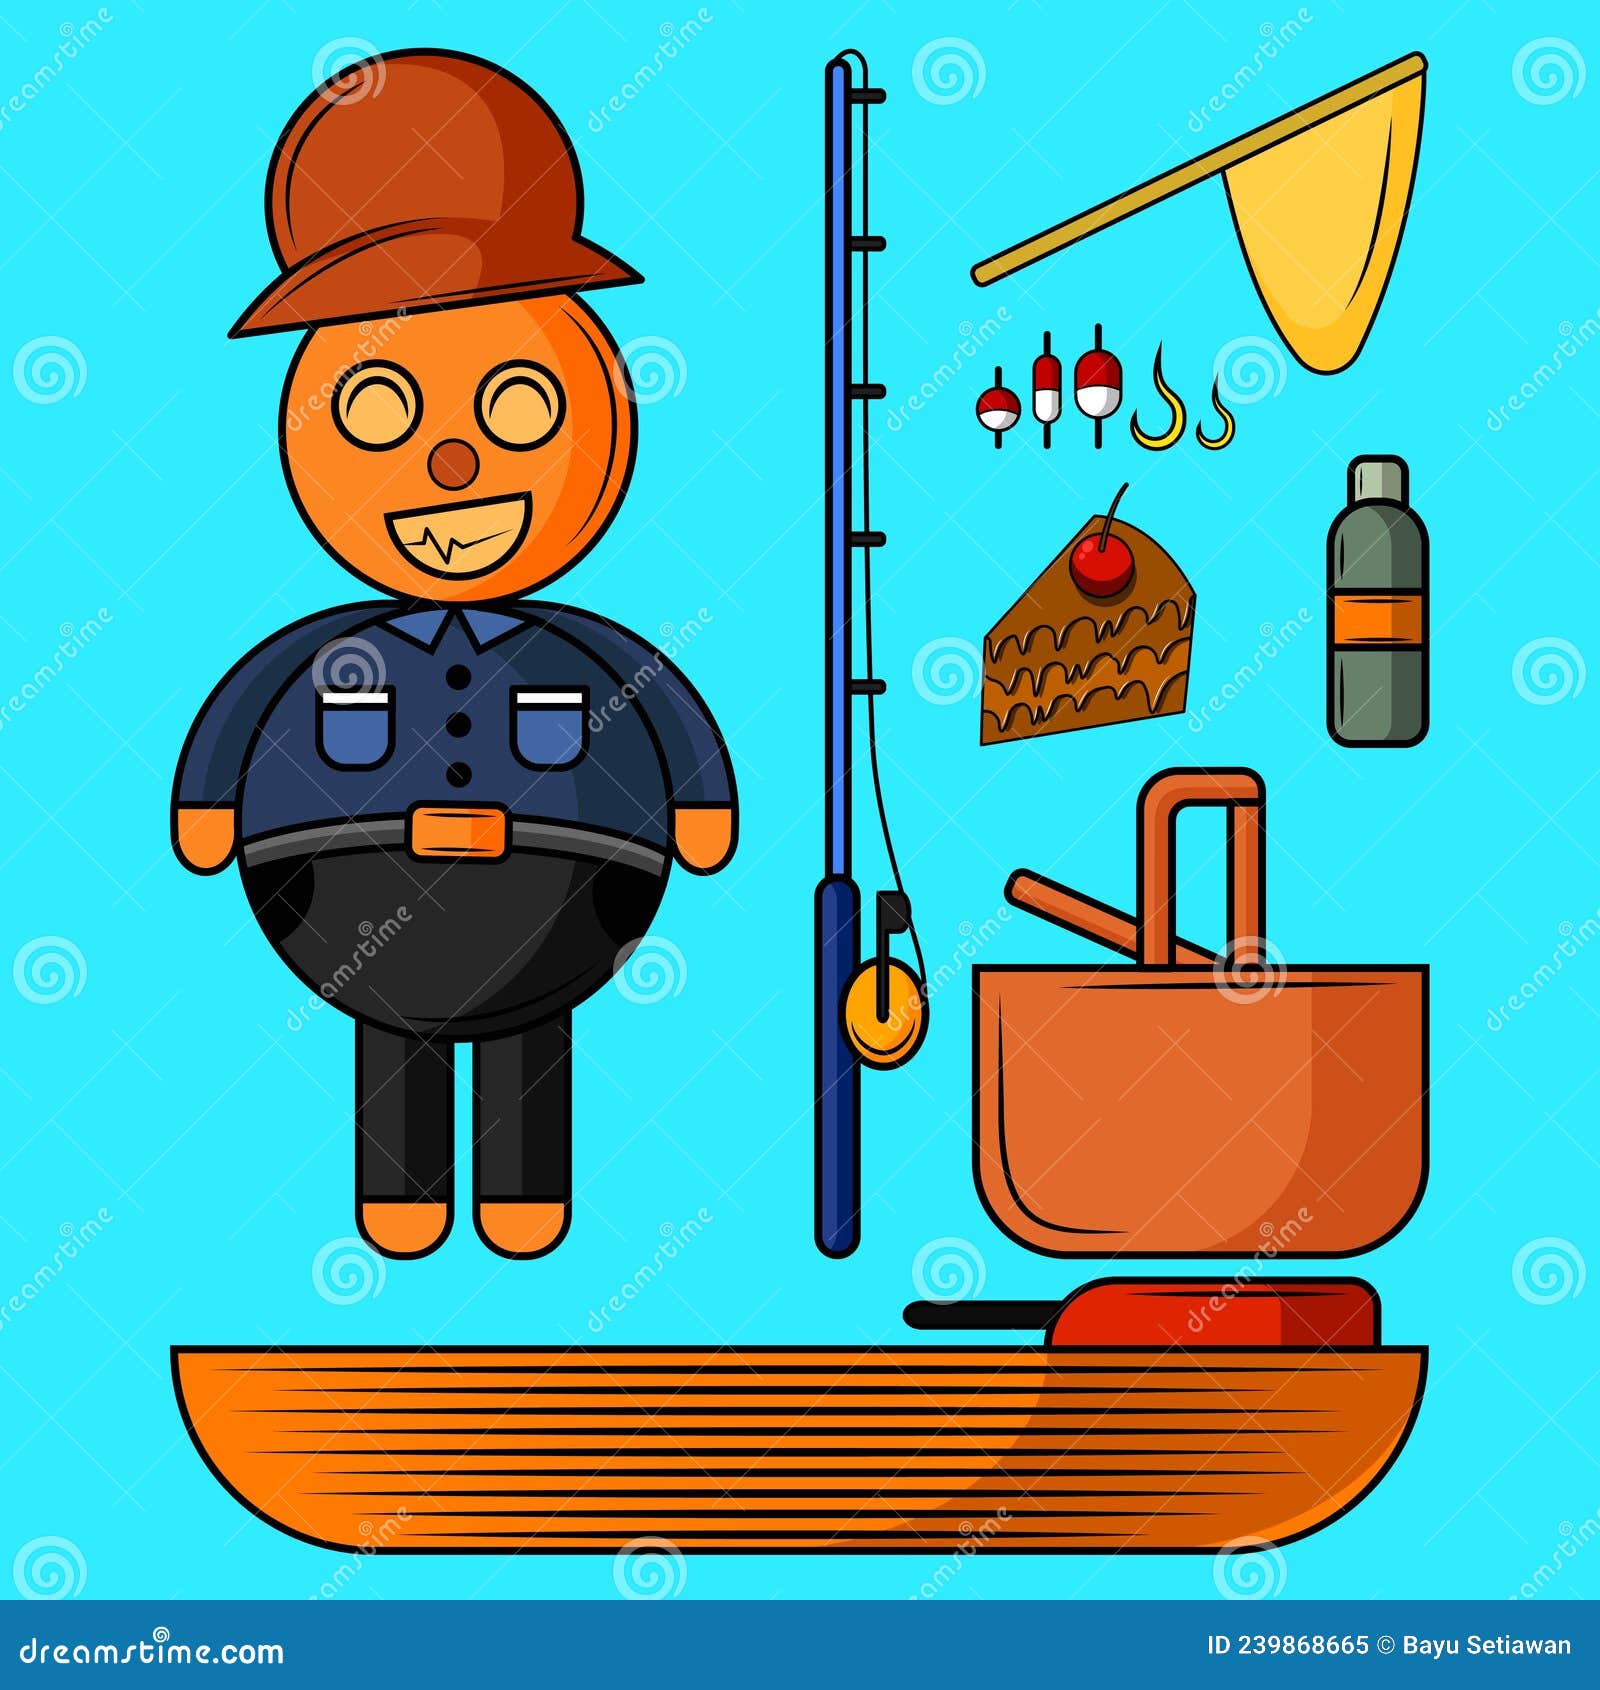 Equipment To Go Fishing on Vacation Stock Vector - Illustration of